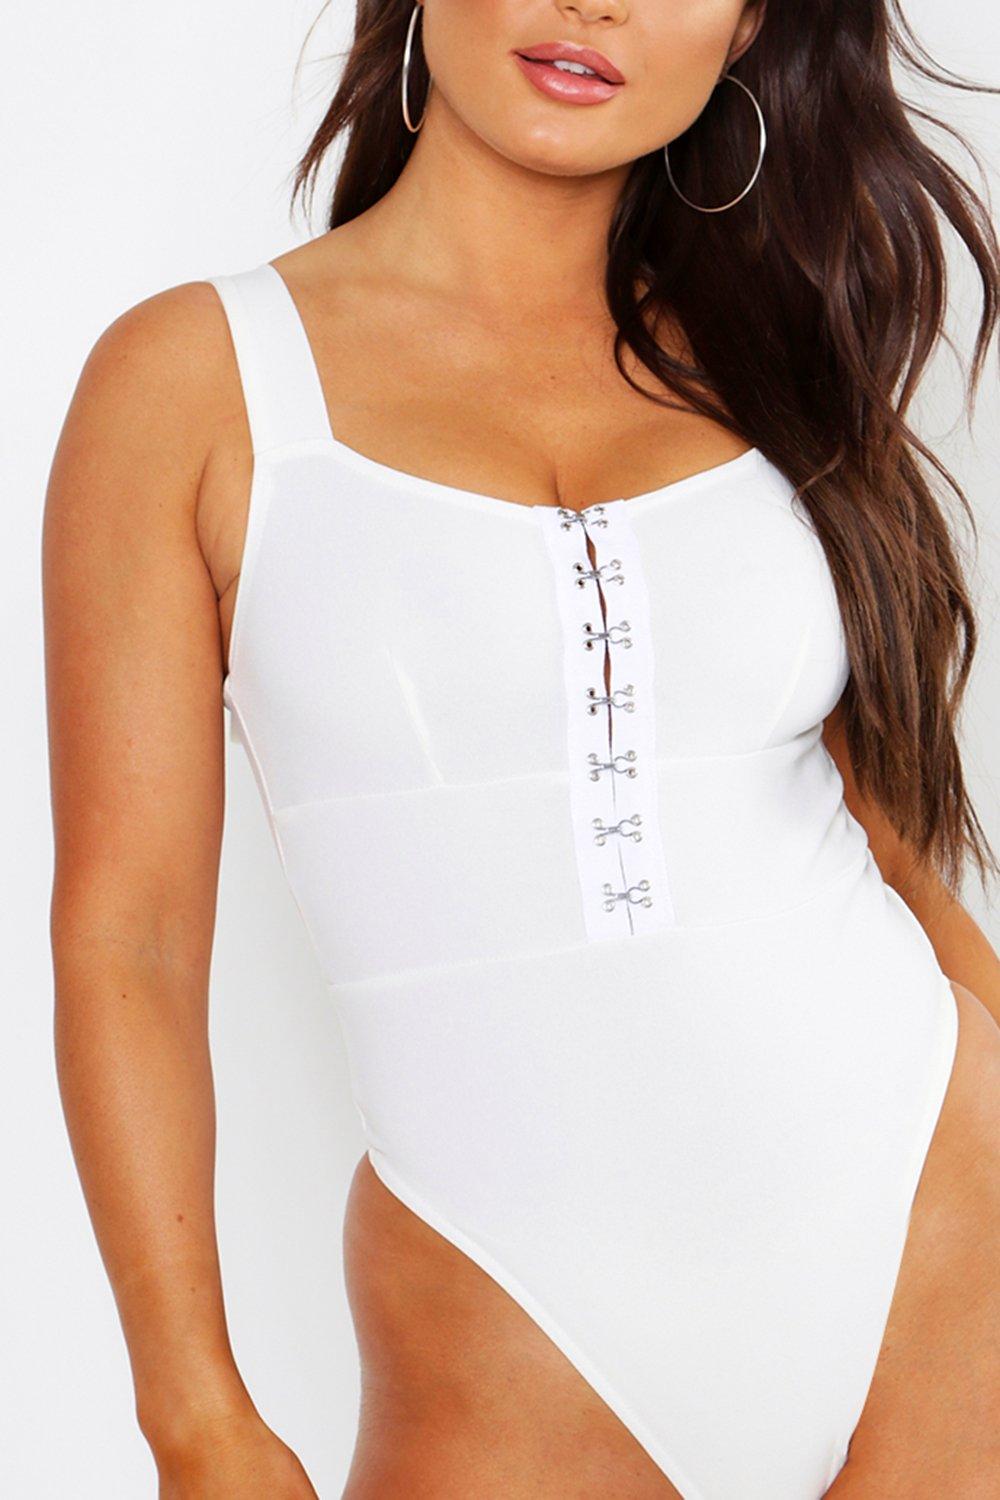 Missguided - Lace Up Front Bodysuit White  Lace bodysuit top, White lace  bodysuit, Lace bodysuit